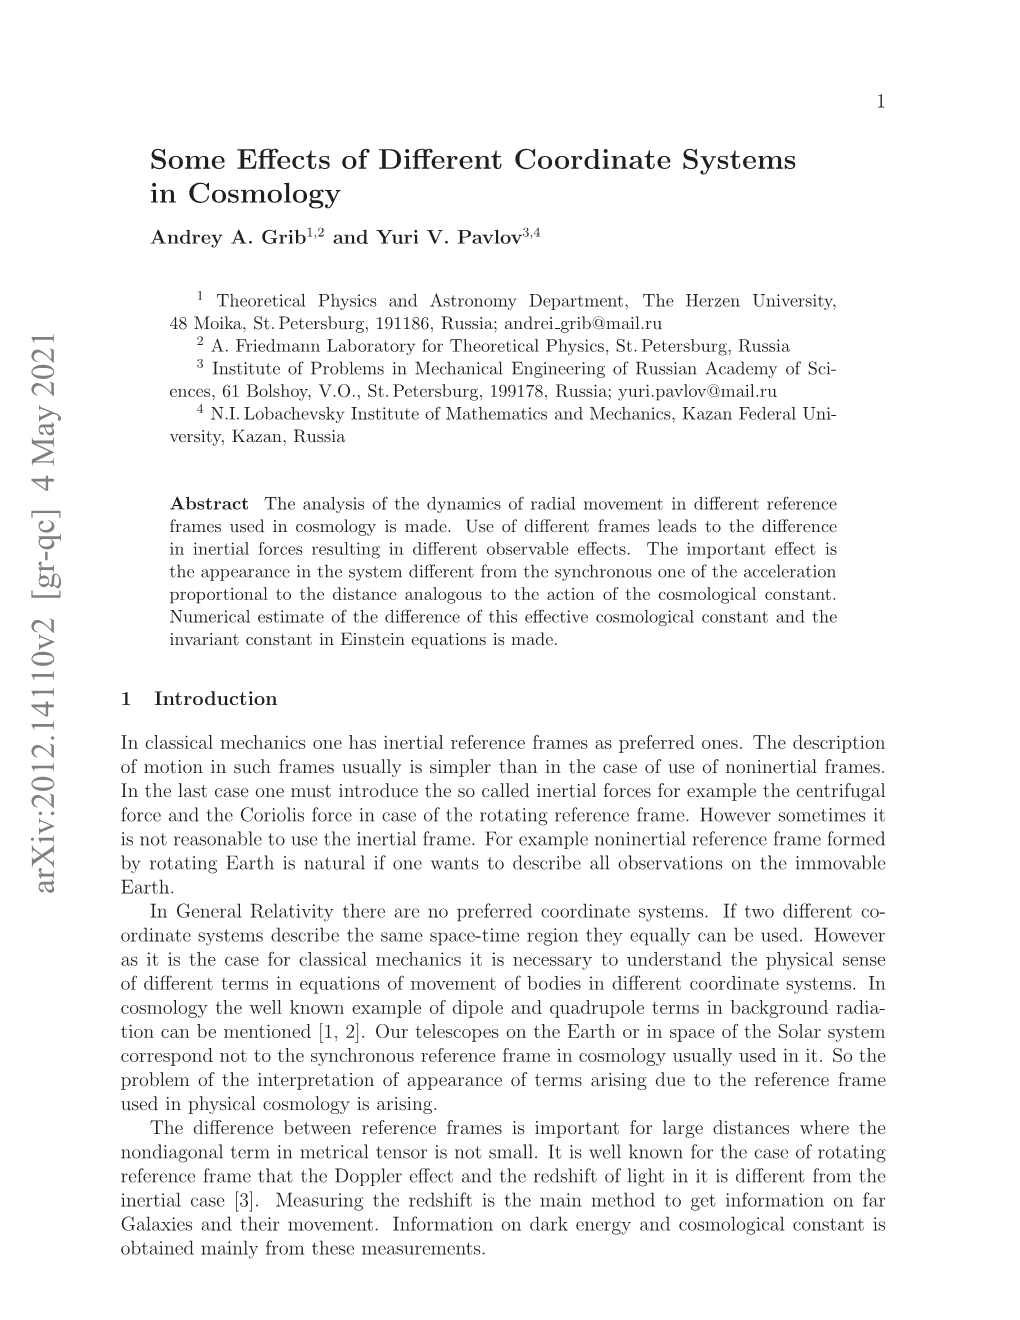 Some Effects of Different Coordinate Systems in Cosmology